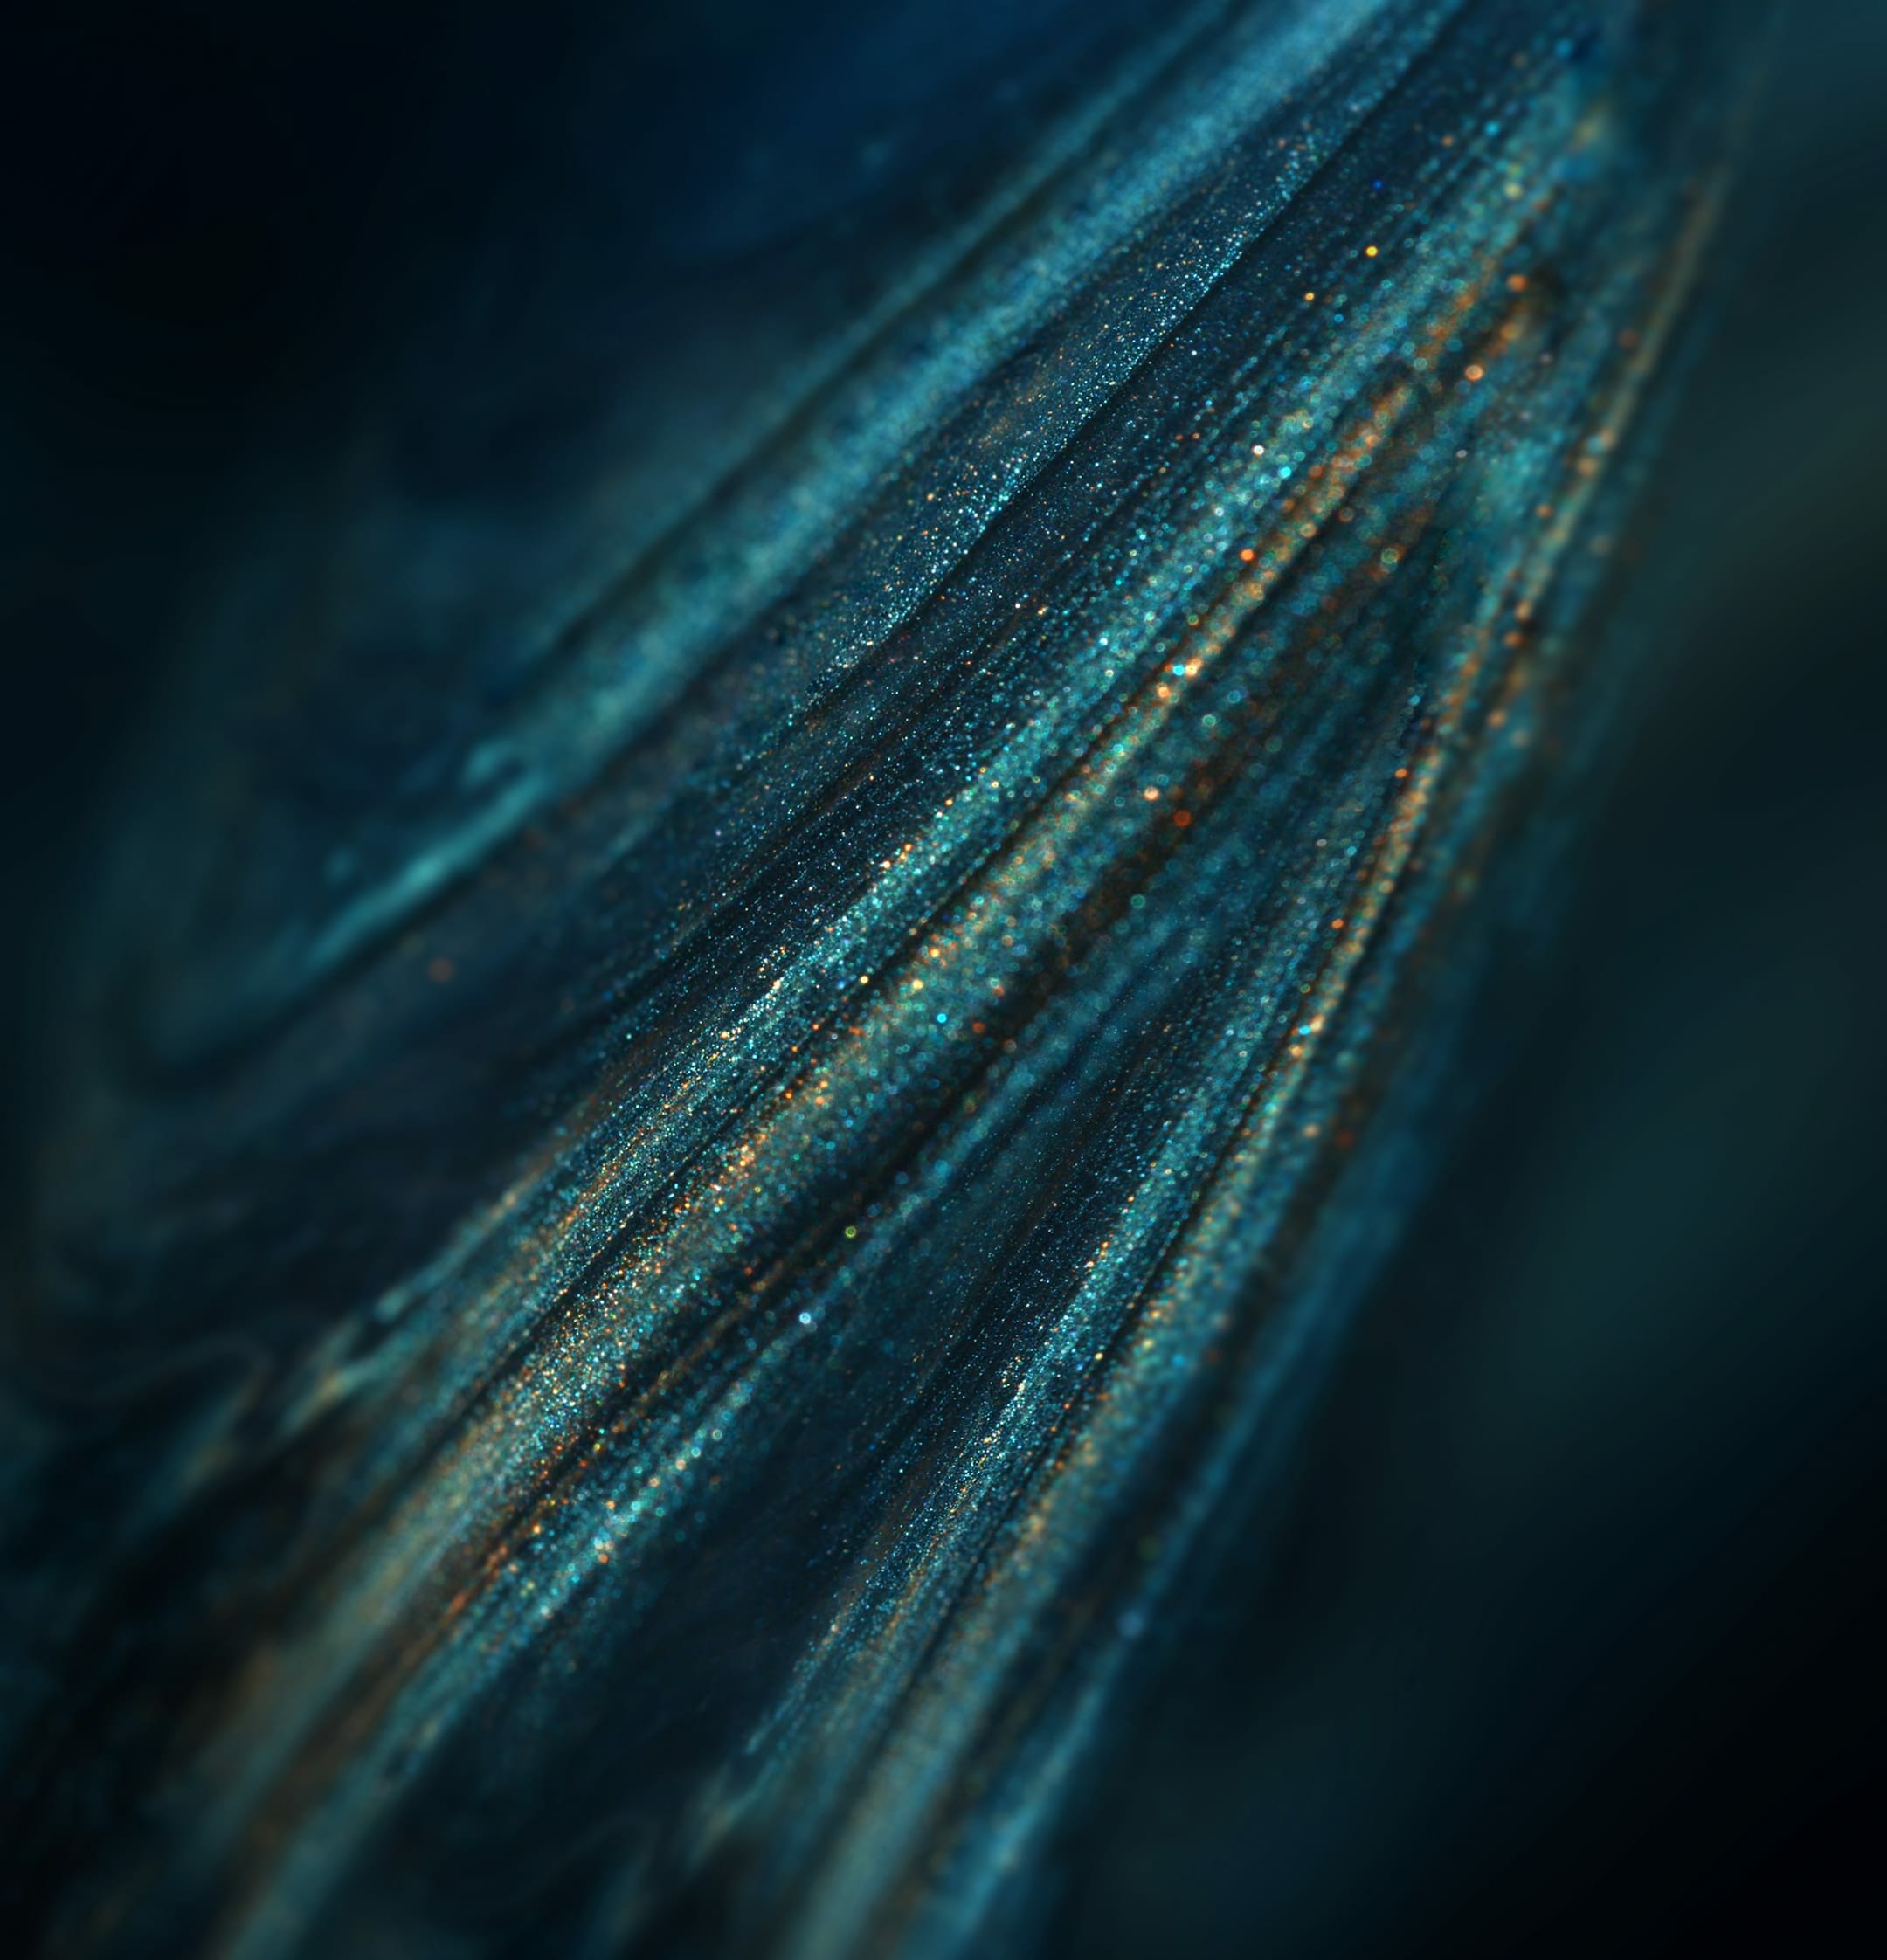 Huawei Mate 20 Pro and Mate 20 X Stock Wallpapers